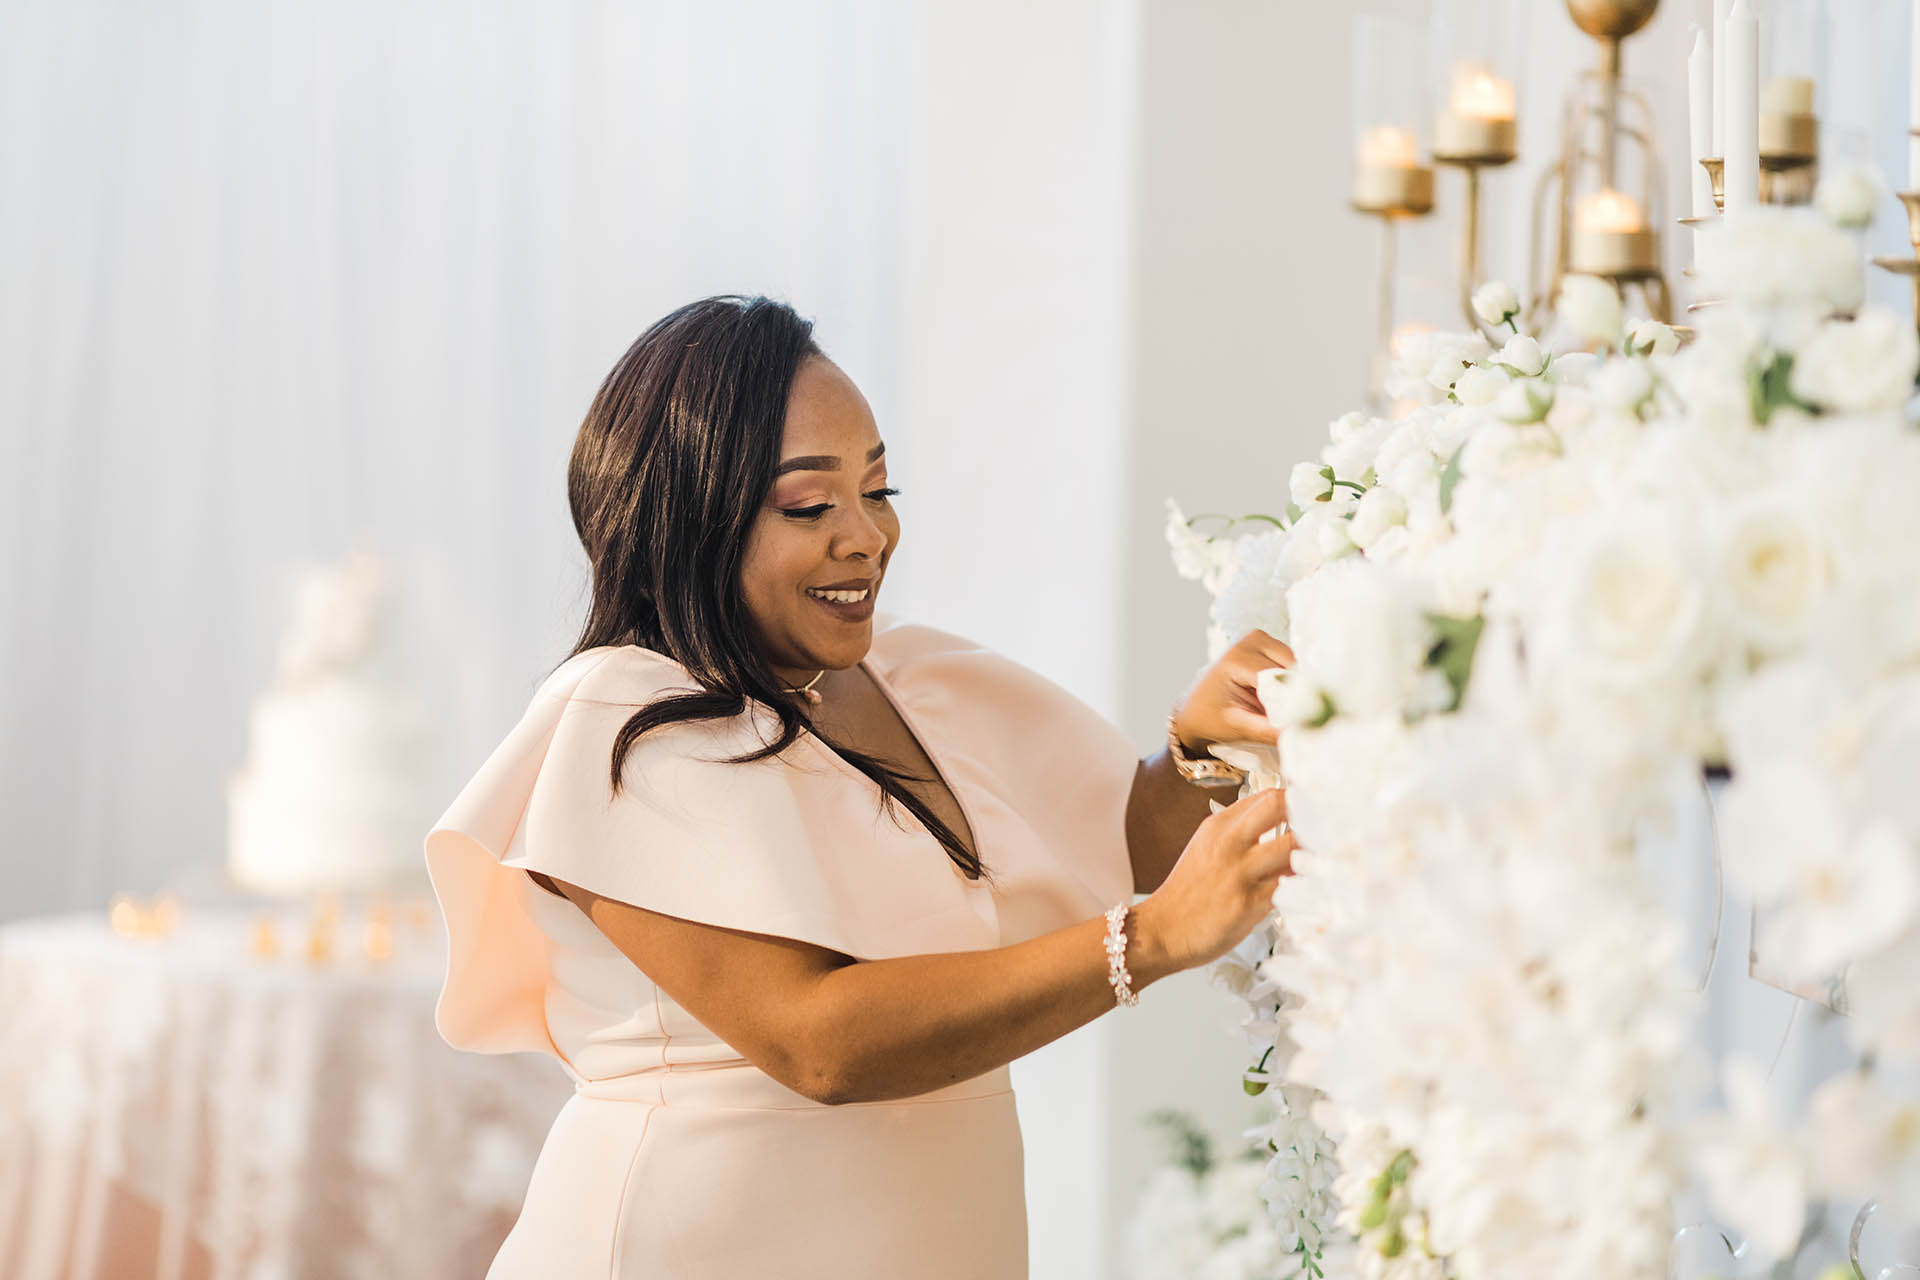 Brand photography; African American woman in a fashionable dress working on a white floral arrangement with a wedding cake in the background